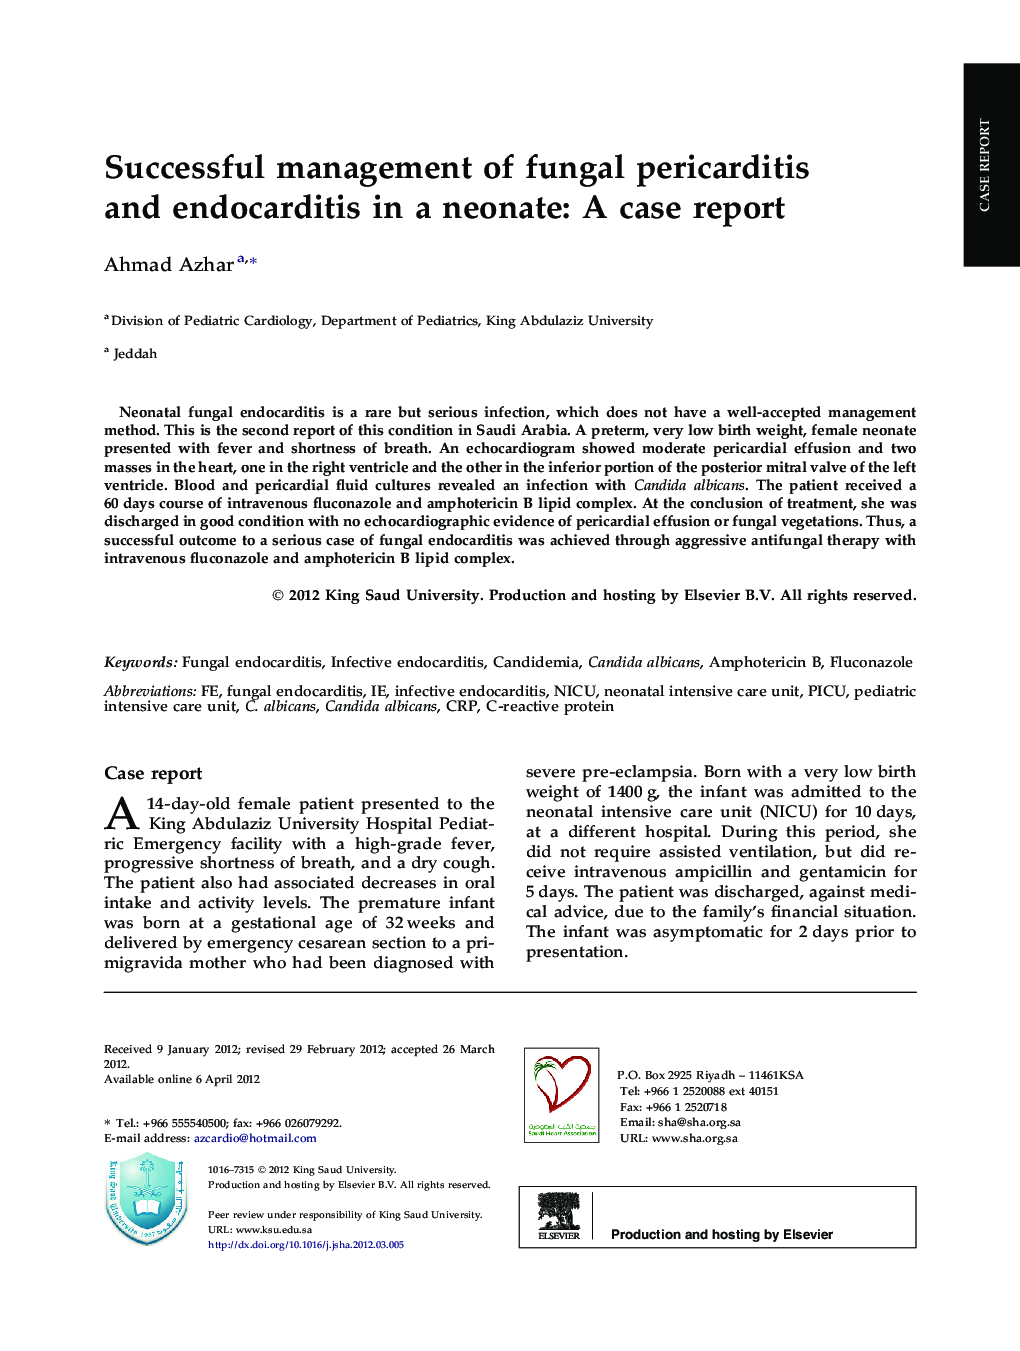 Successful management of fungal pericarditis and endocarditis in a neonate: A case report 